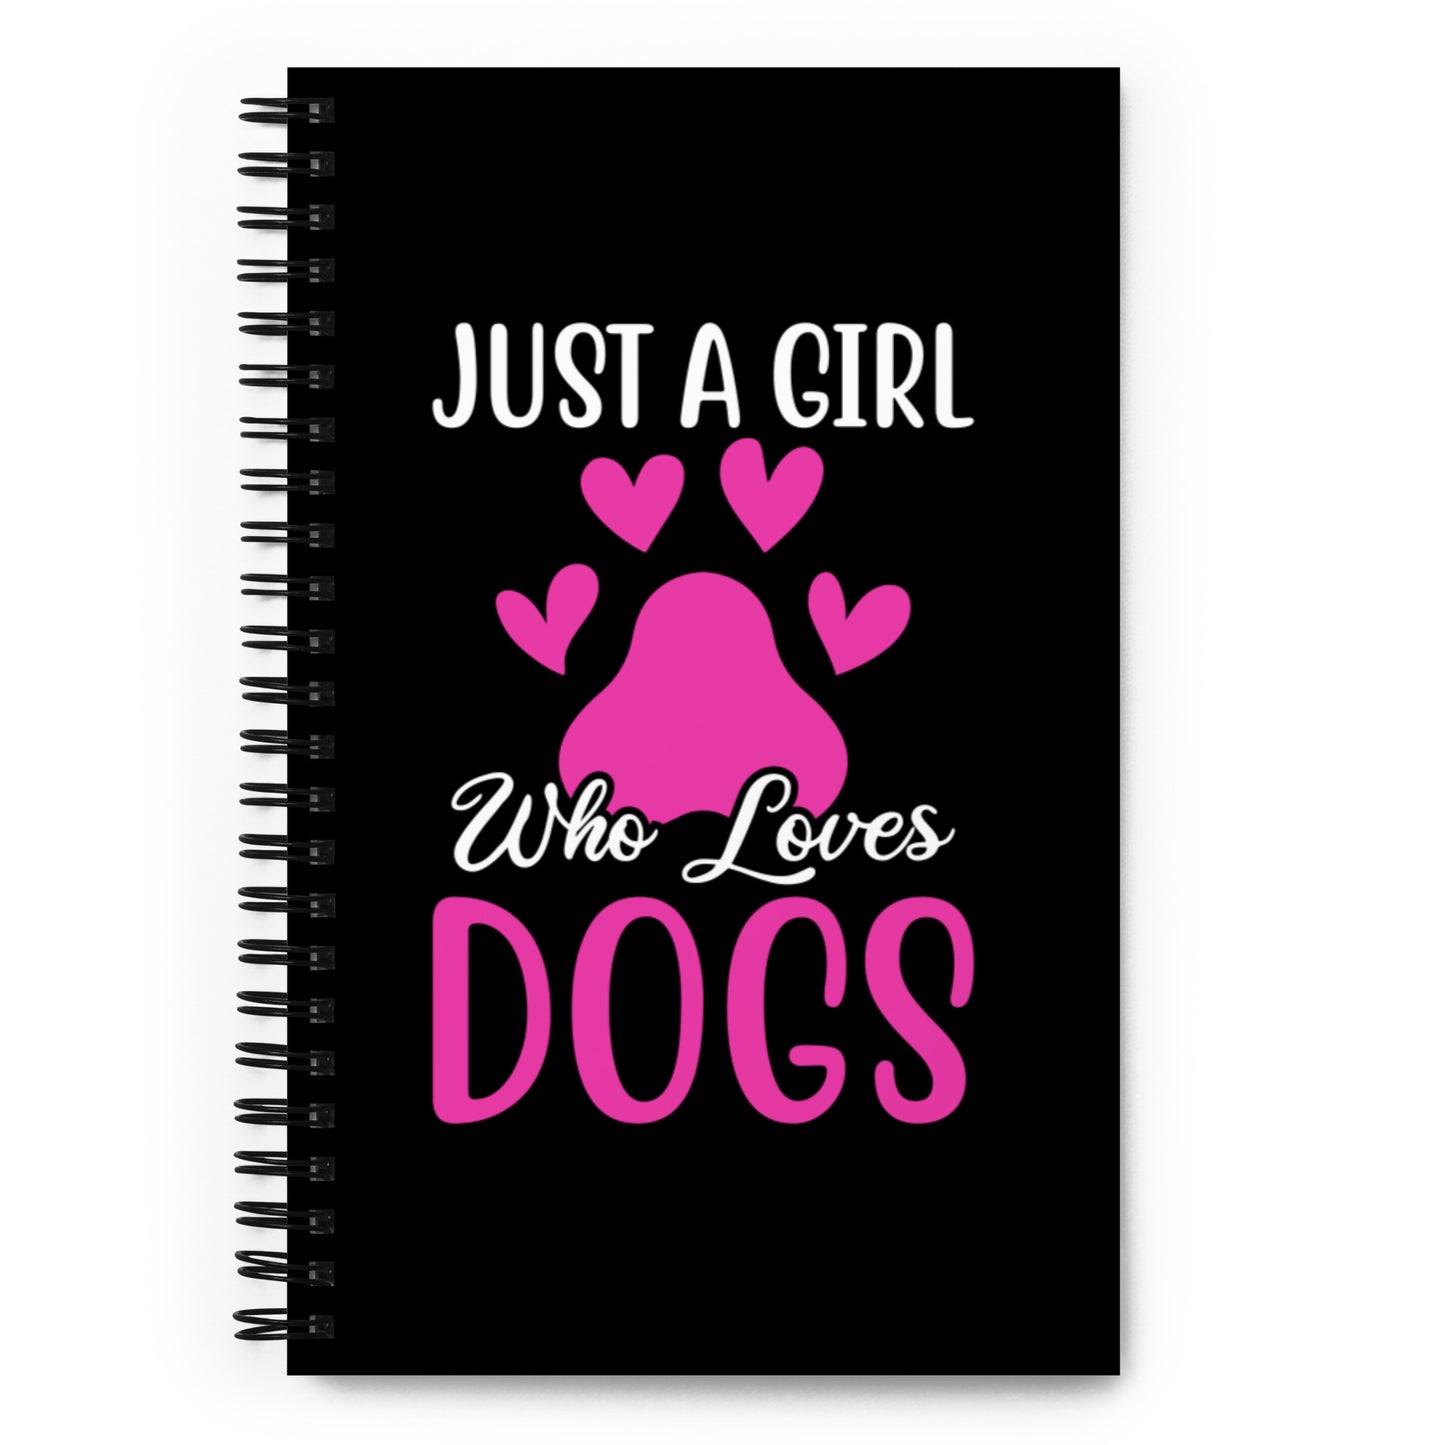 Just a Girl Who Loves Dogs Spiral notebook